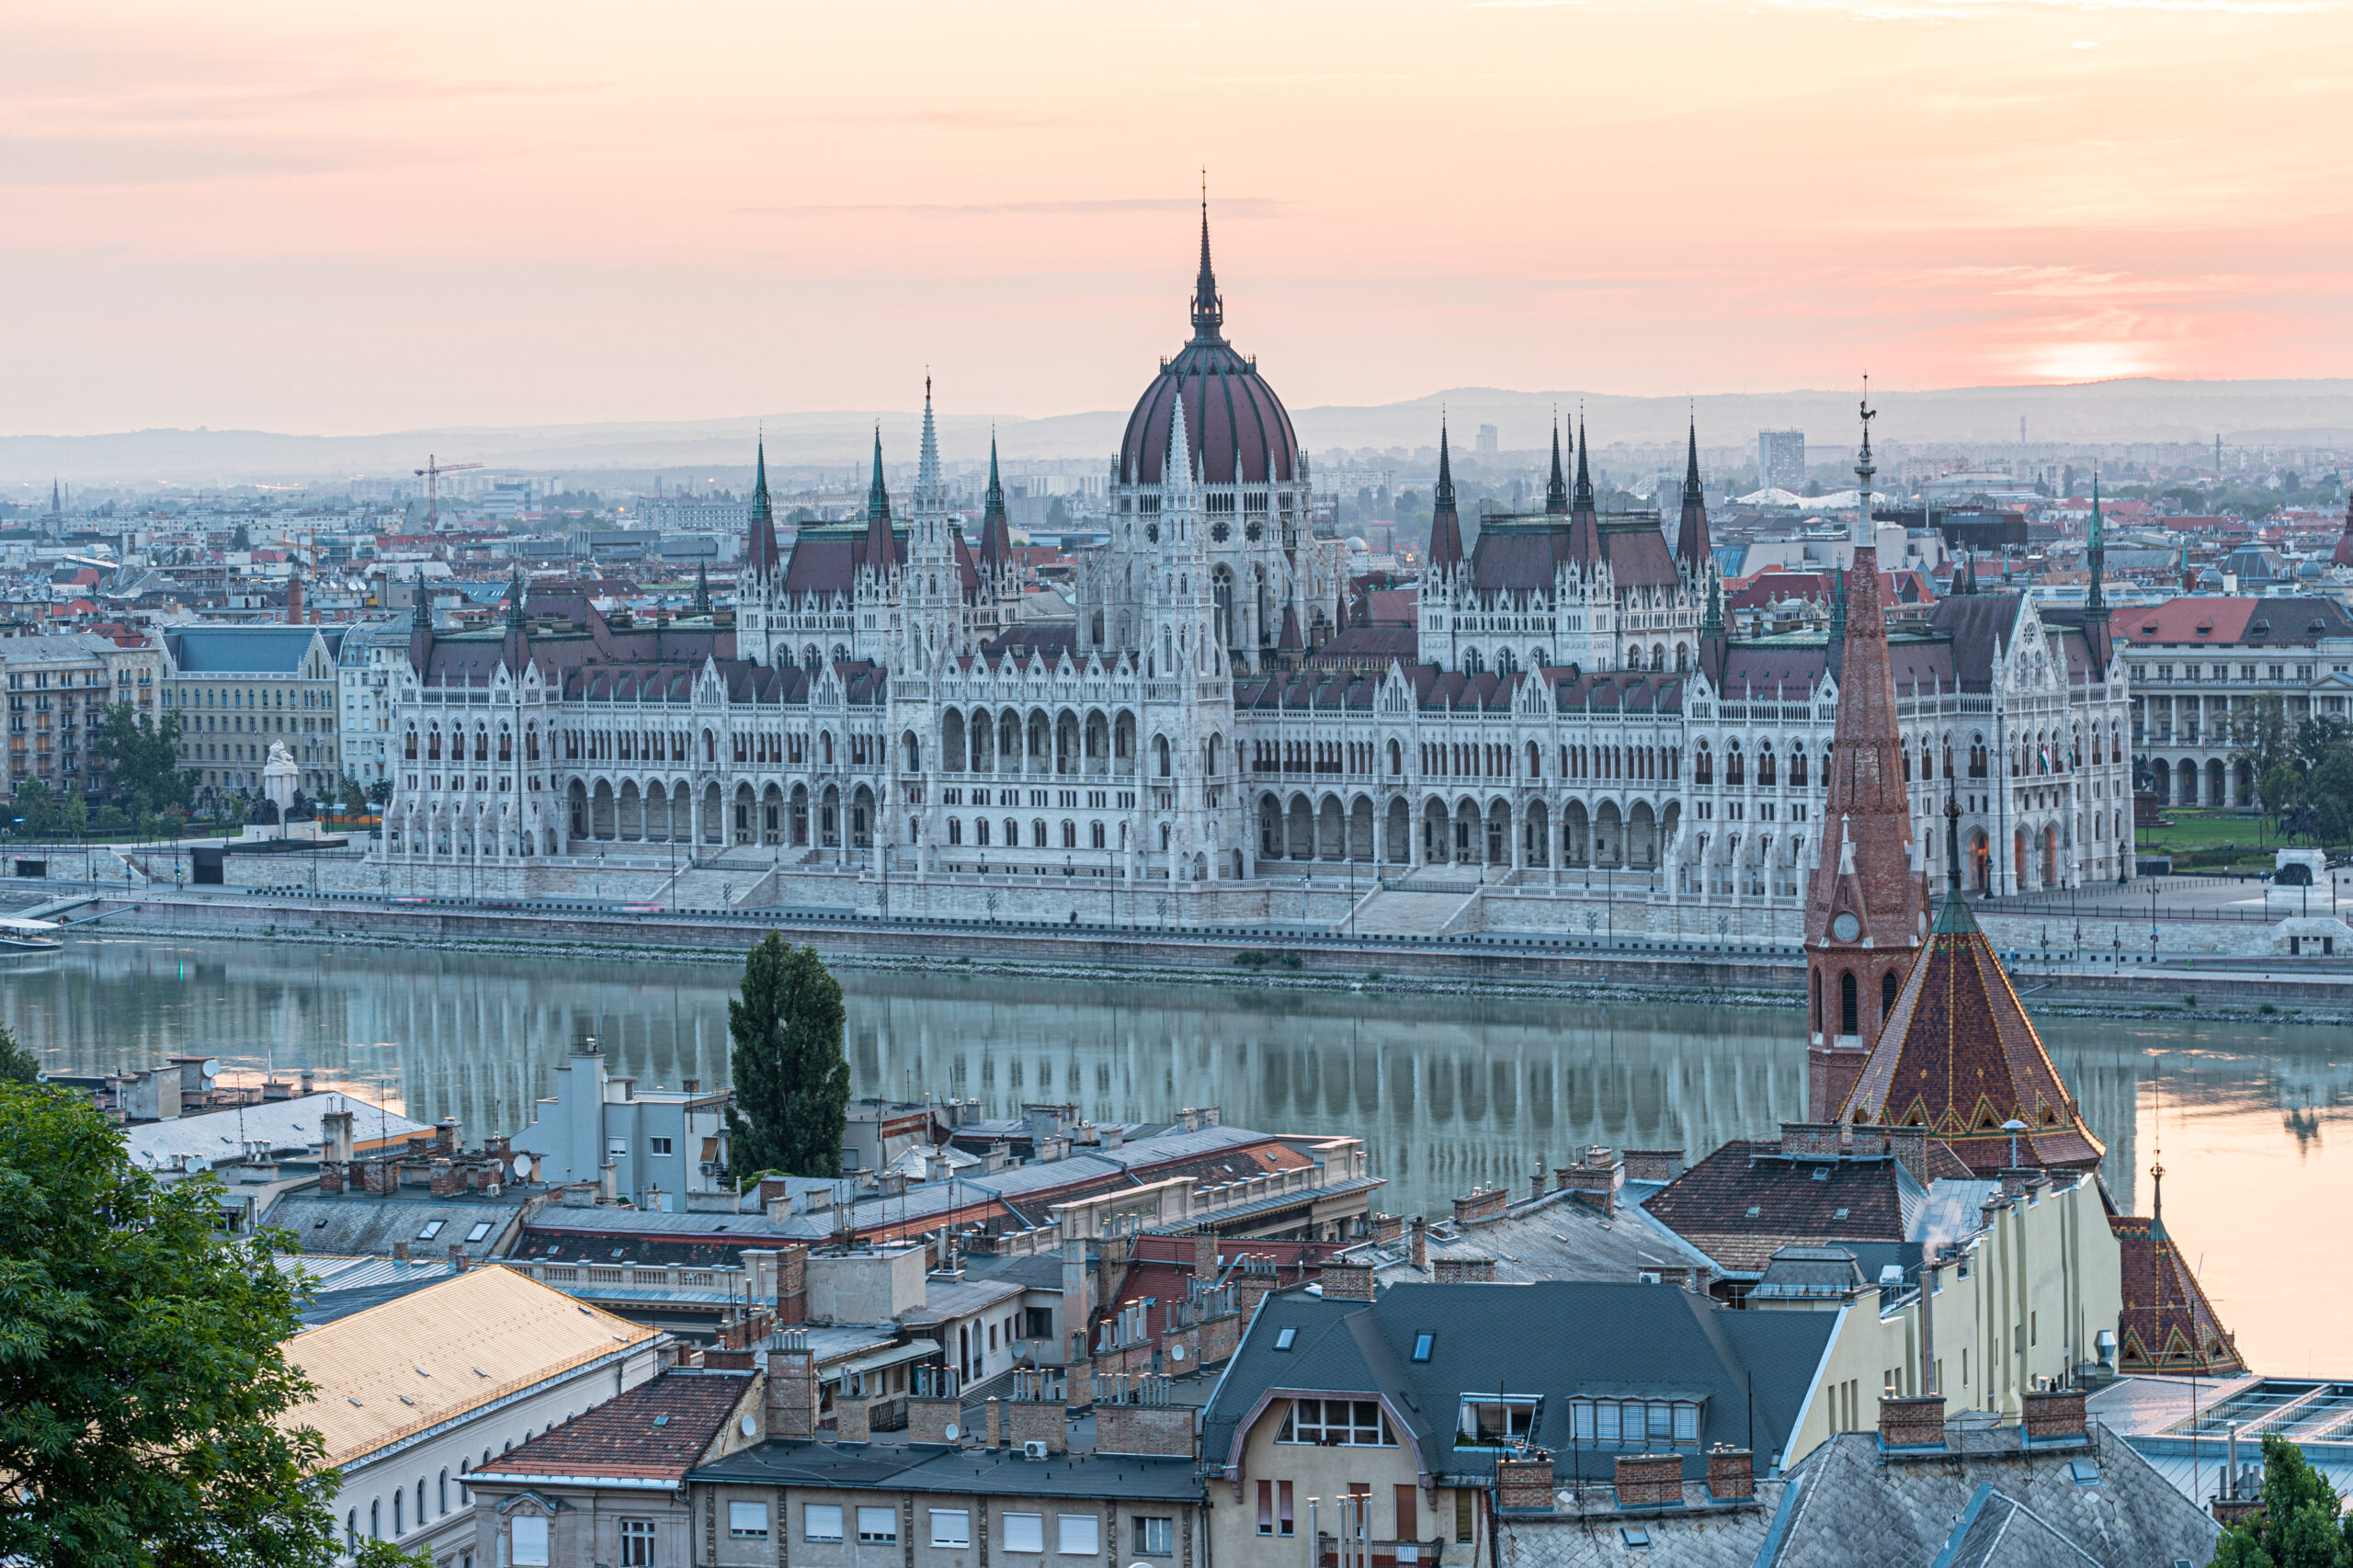 The Hungarian Parliament, one of the most iconic buildings of Budapest